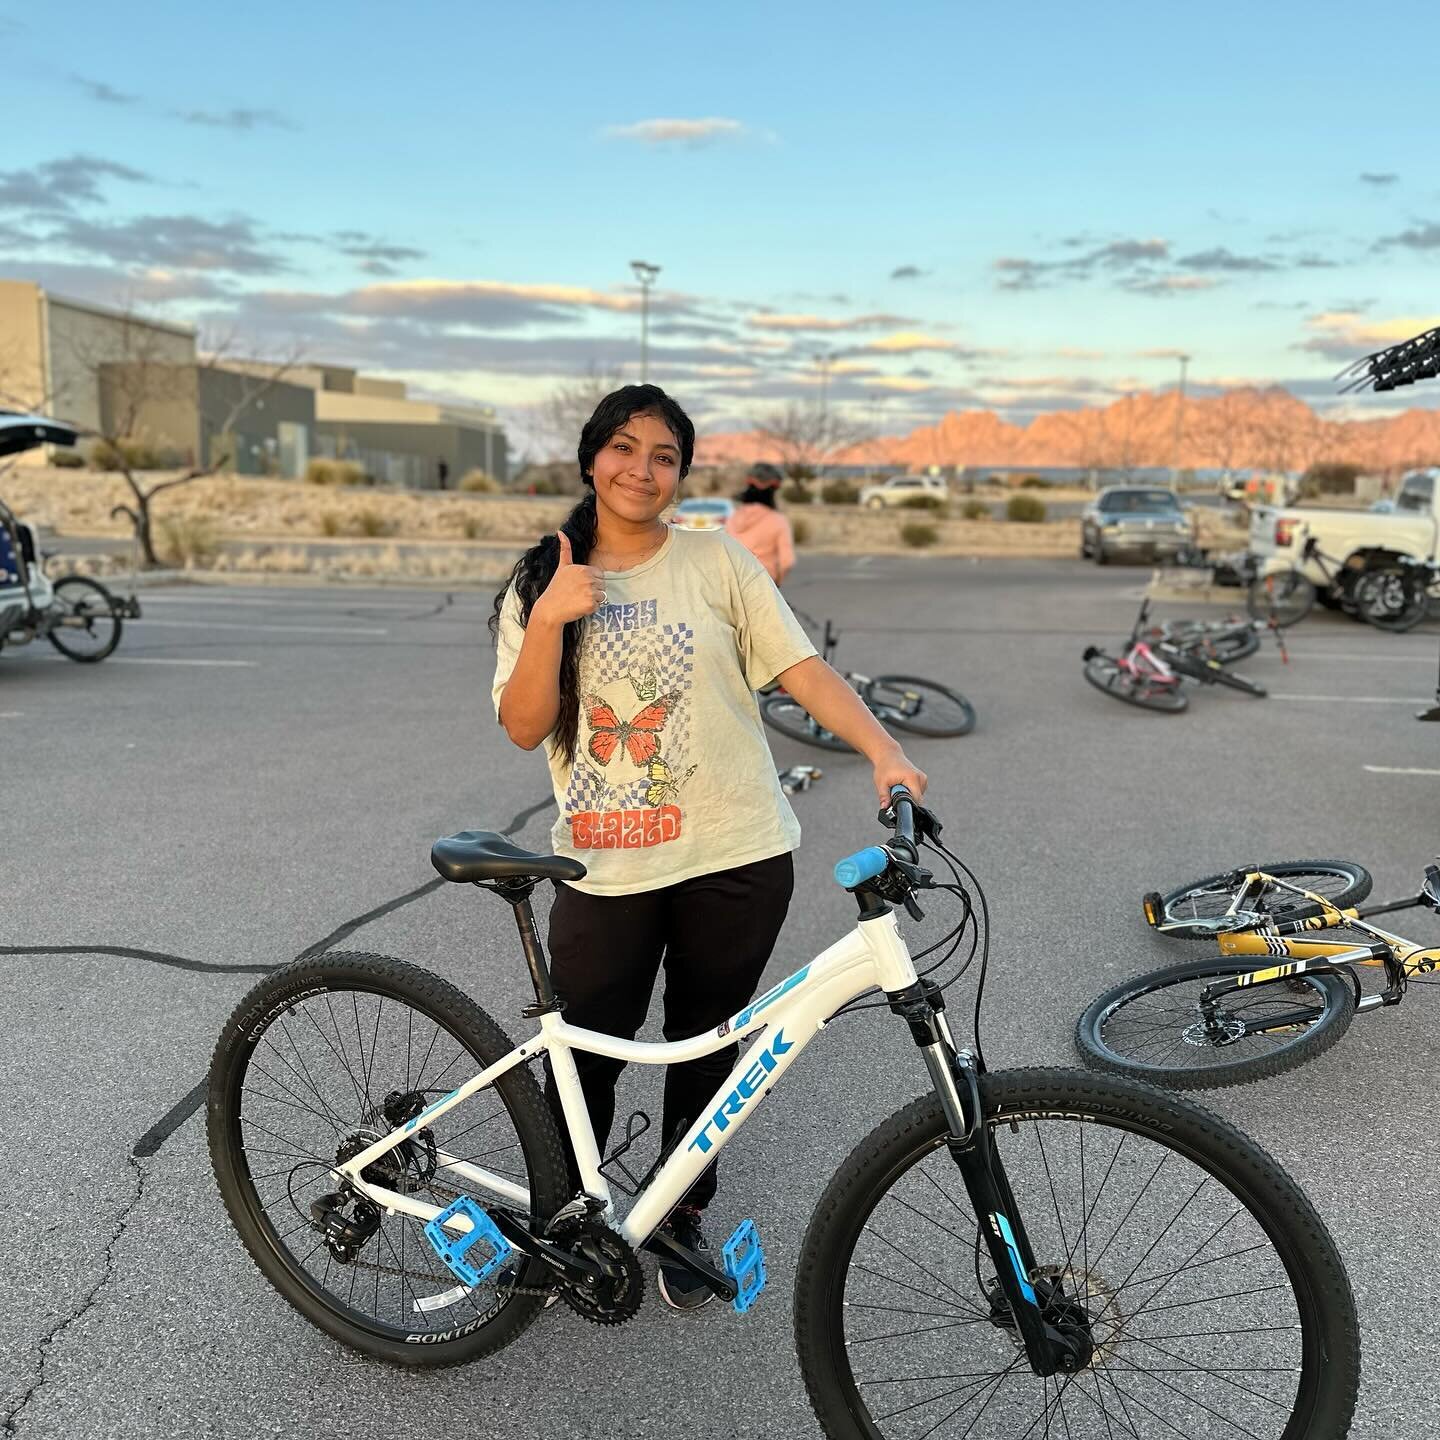 New bike!!! New bike rack day!!! We are so grateful for the commitment and enthusiasm of our second year students. They totally earned these new wheels and we are happy we were able to provide them with these sweet rides thanks to Free bikes 4 kids N